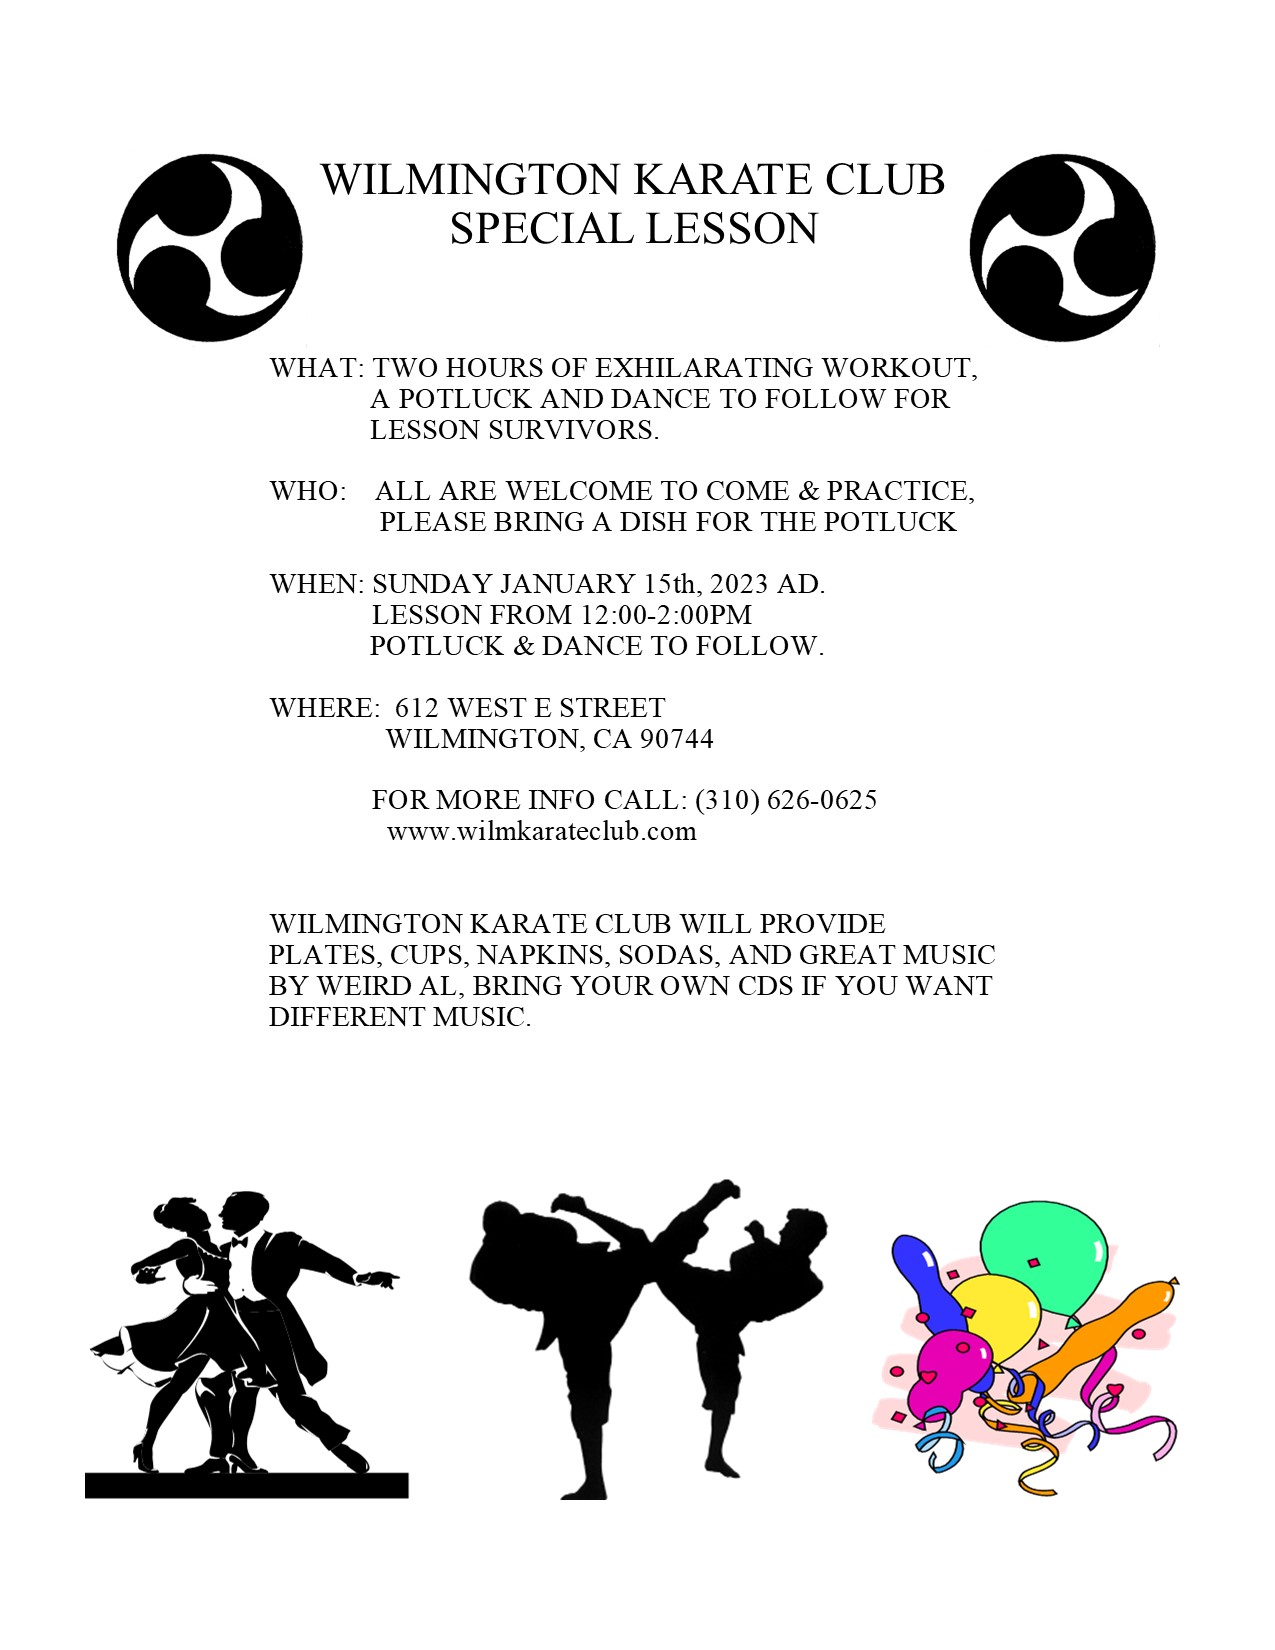 Special lesson